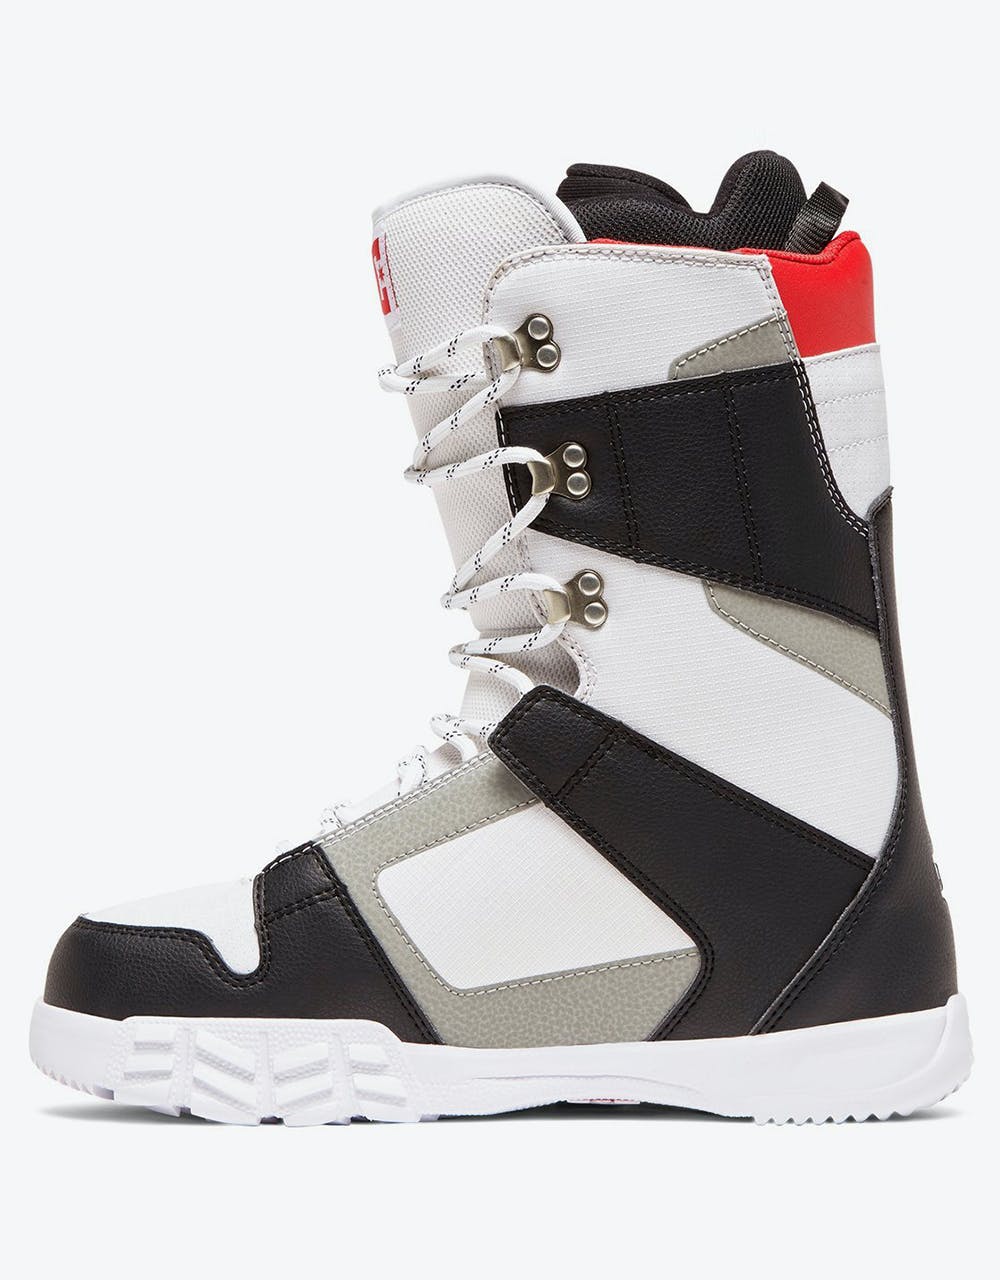 DC Phase 2020 Snowboard Boots - Black/White